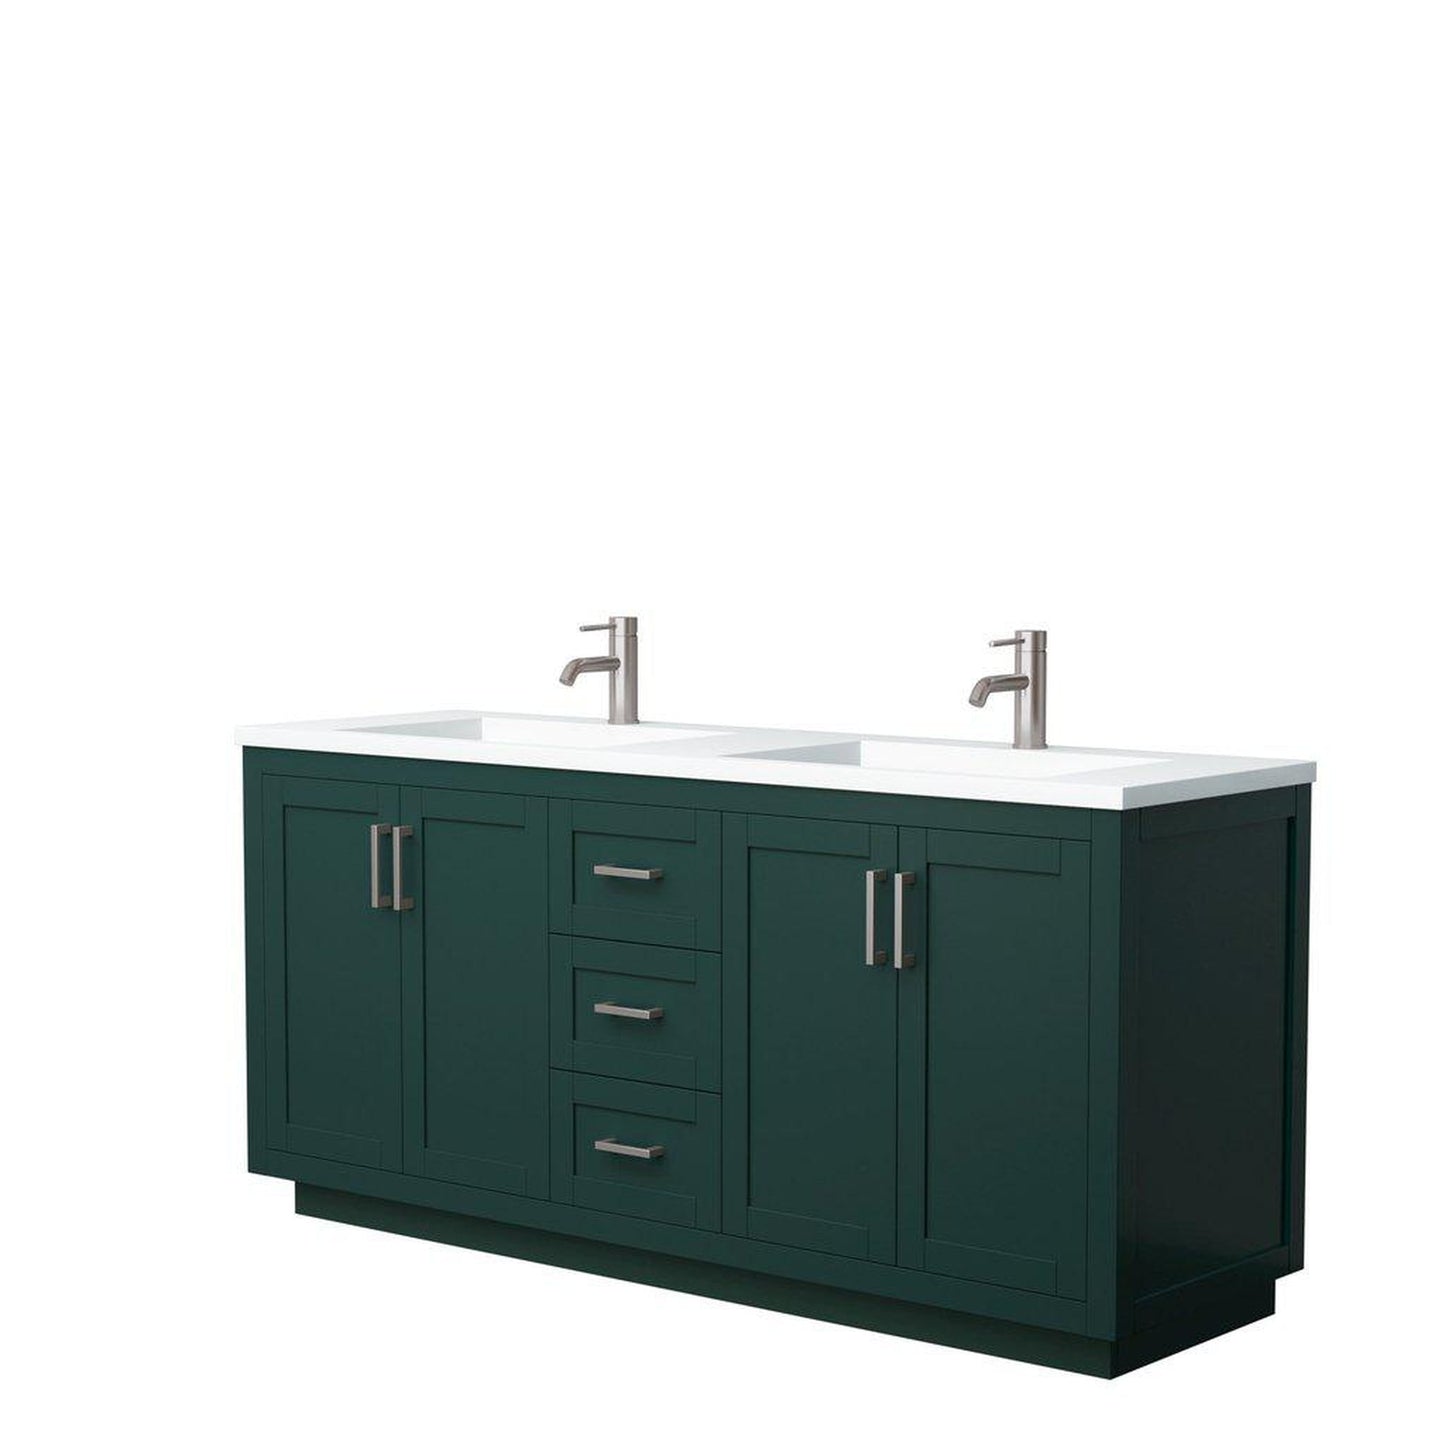 Wyndham Collection Miranda 72" Double Bathroom Green Vanity Set With 1.25" Thick Matte White Solid Surface Countertop, Integrated Sink, And Brushed Nickel Trim